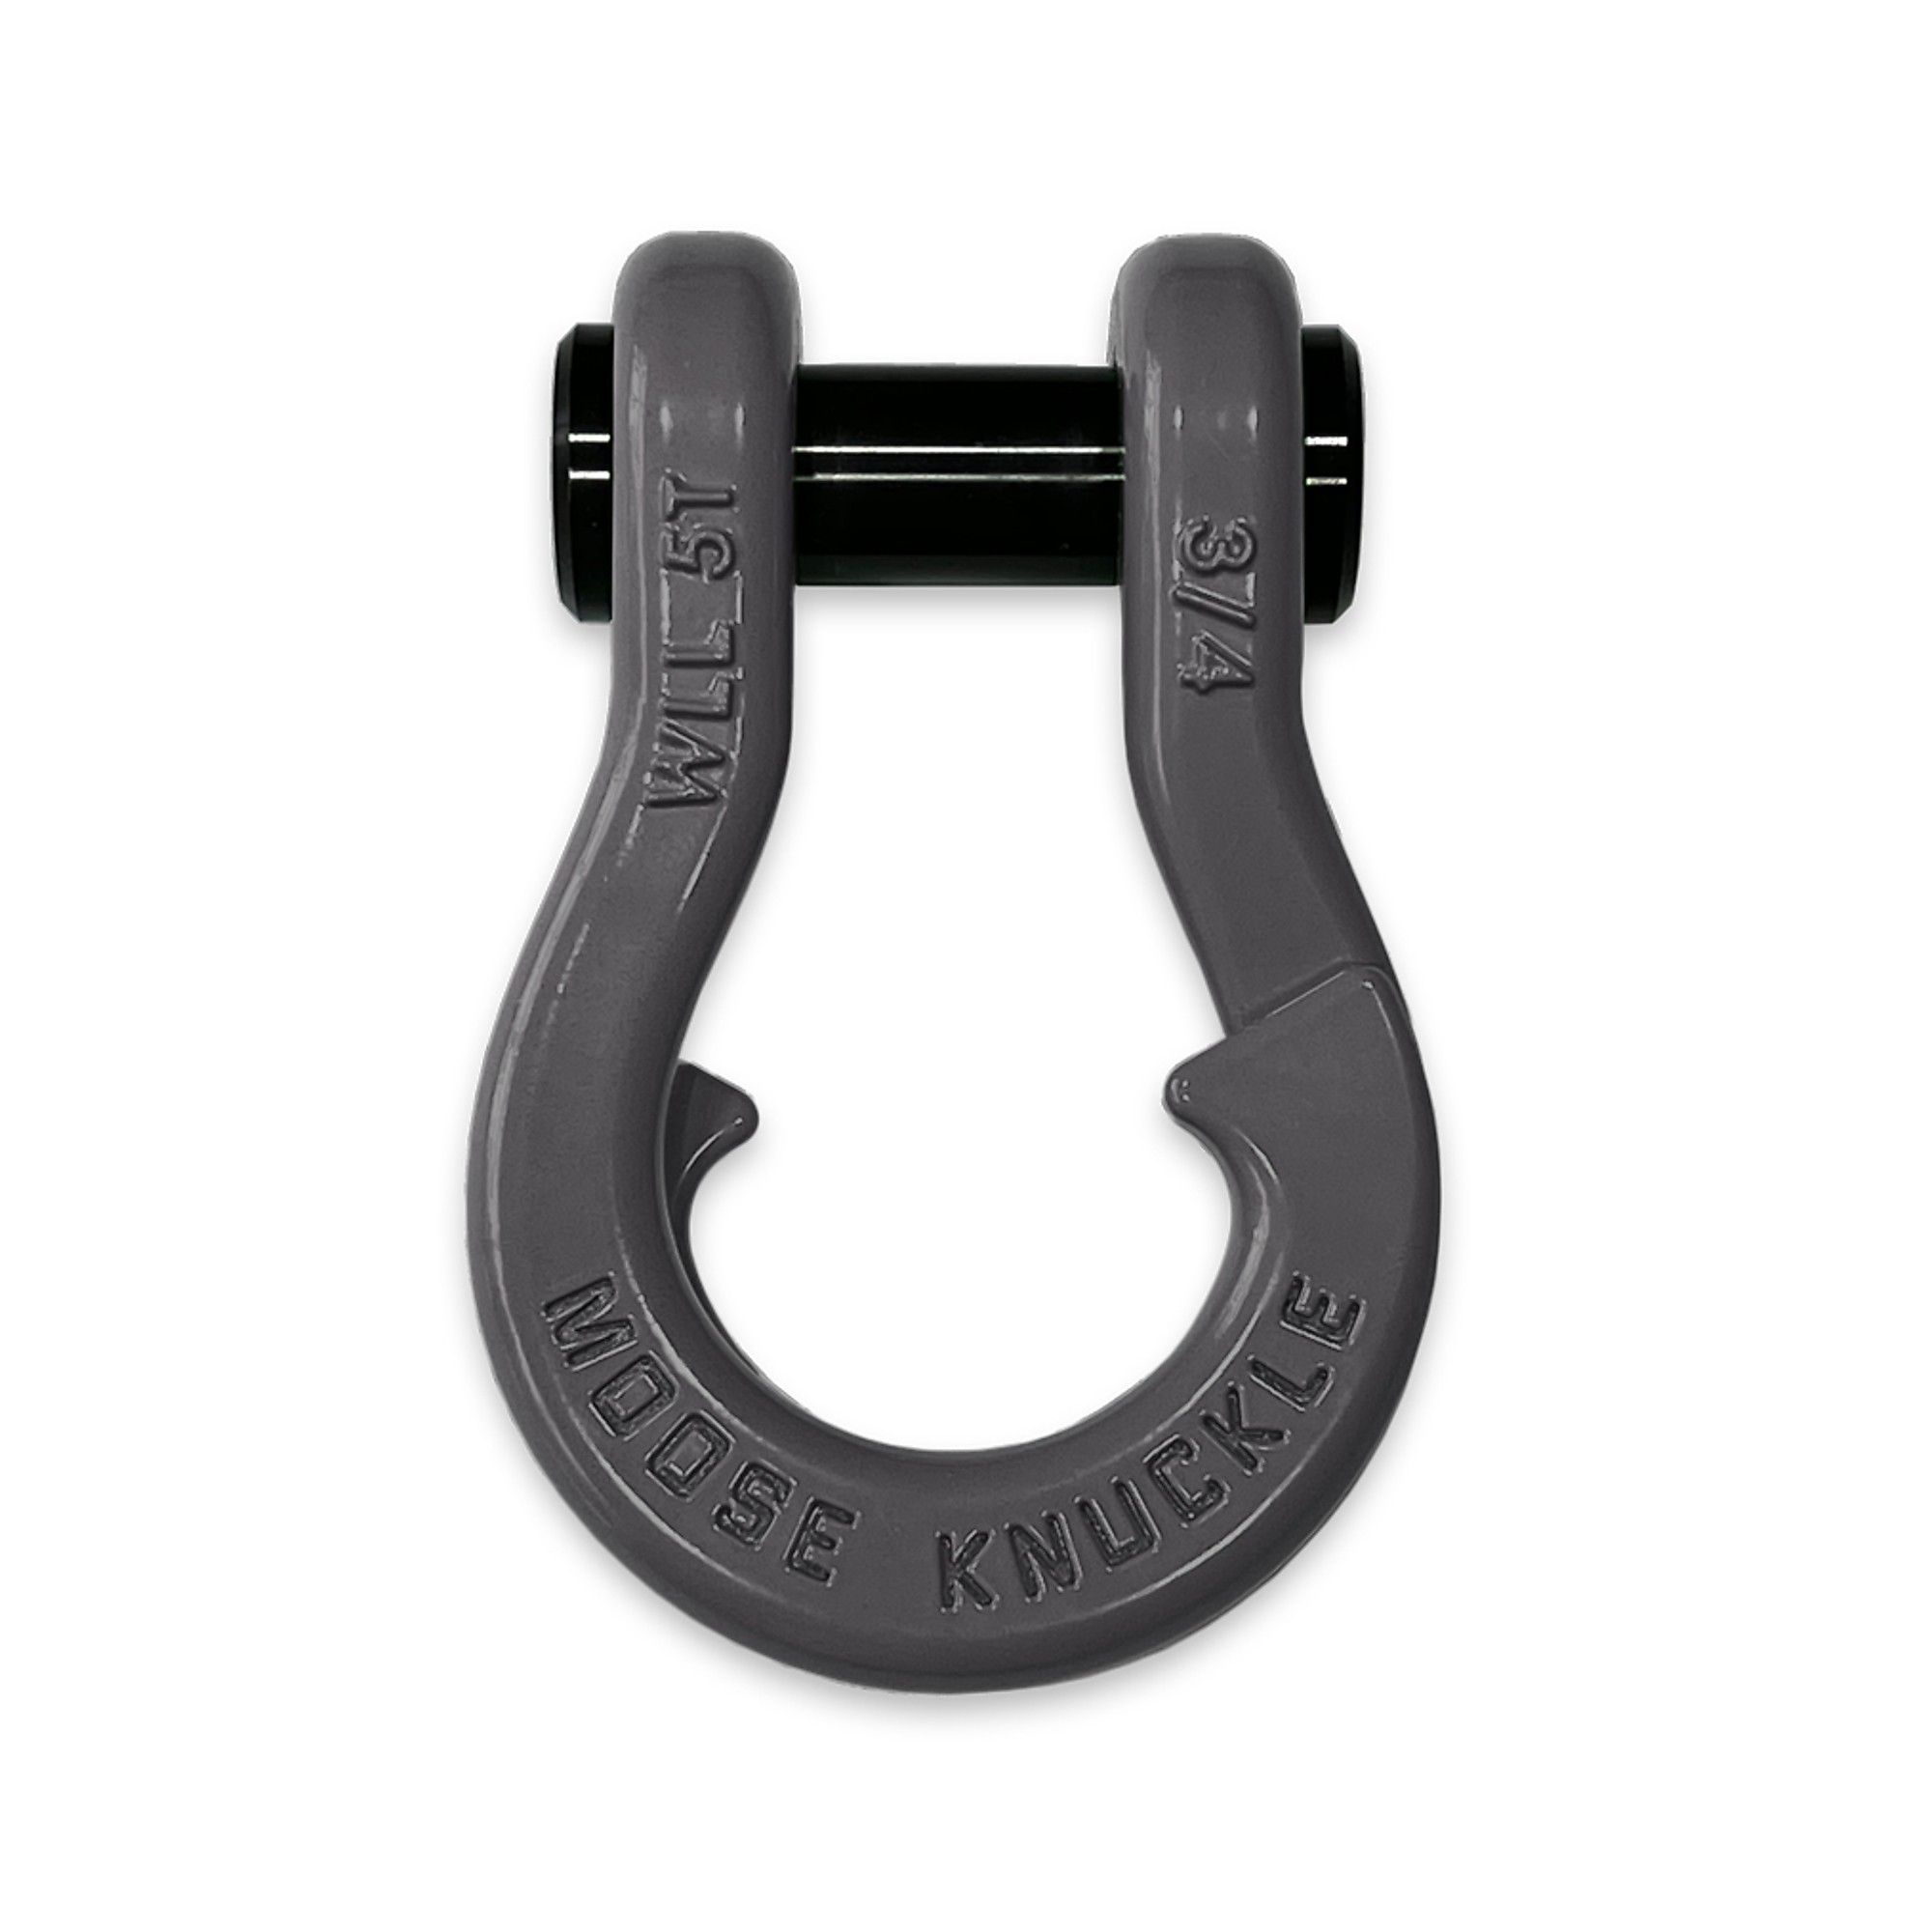 Moose Knuckle Offroad, Gun Gray 3/4Inch Recovery Towing Split Shackle, Working Load Limit 10000 lb, Model FN000020-002